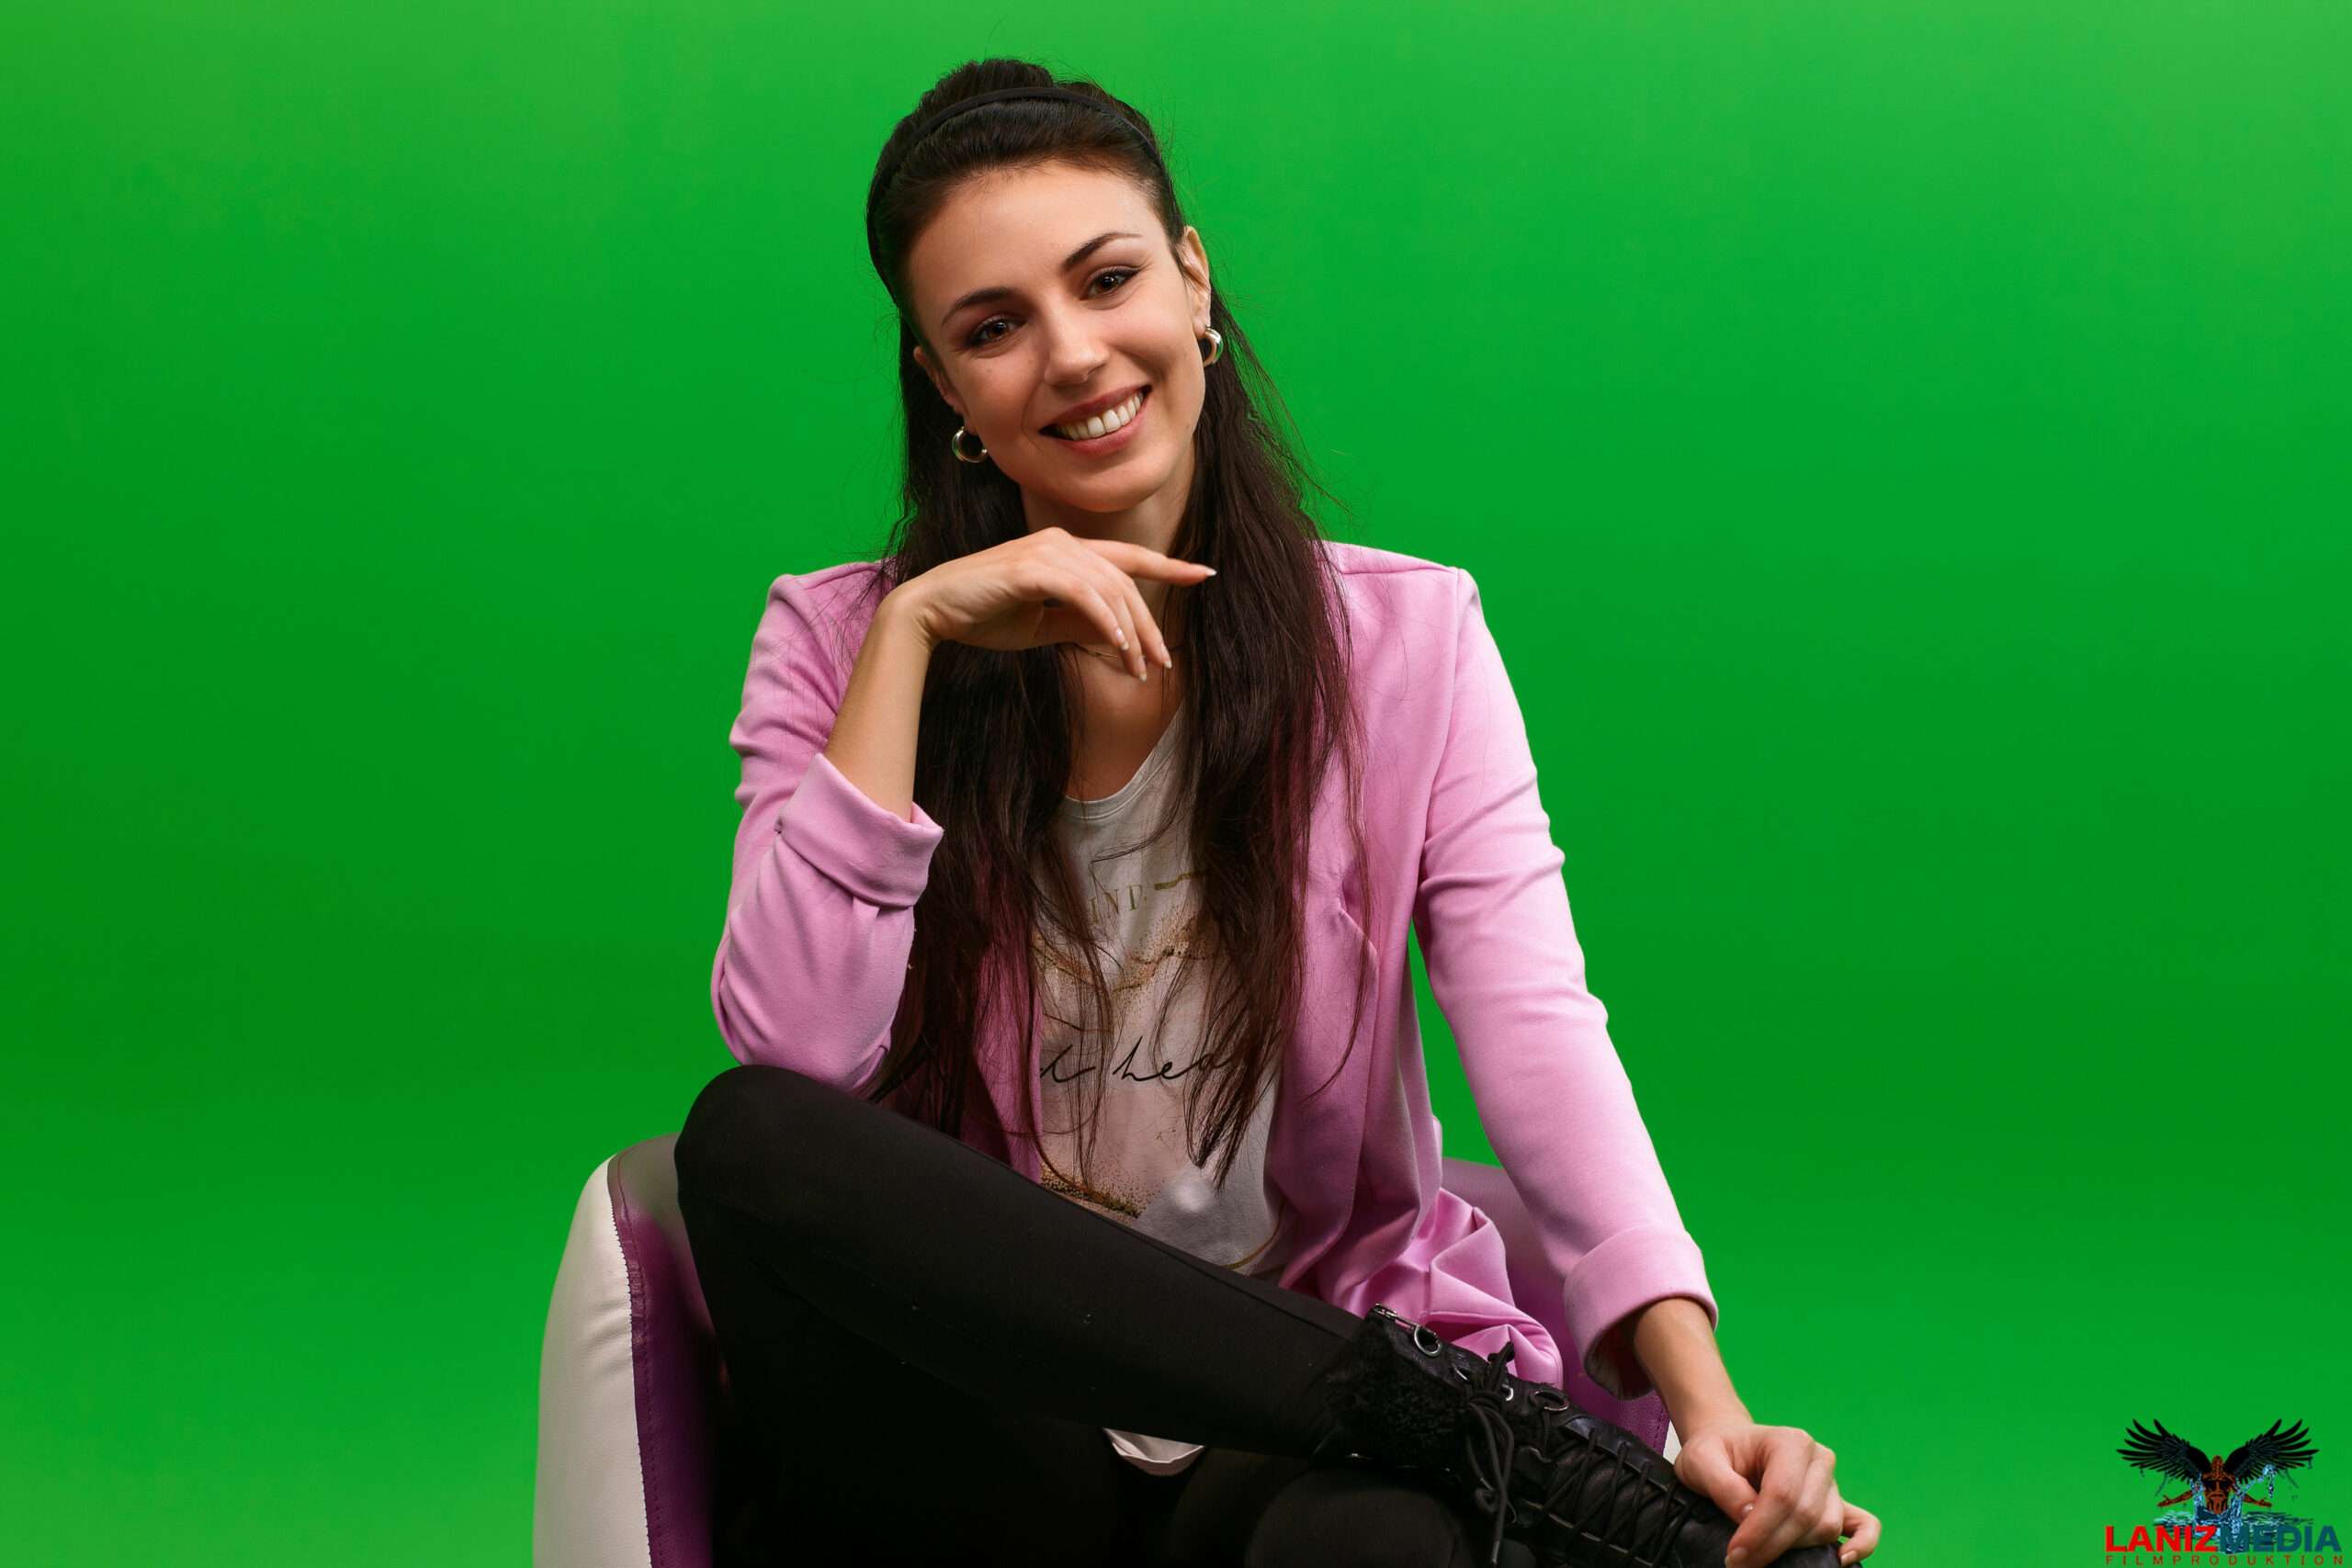 Greenscreen Studio mieten in München If you are looking for the best green studio on rent in Munich? Hire Bring It Online's green screen studio. It is one of the best Chroma studios